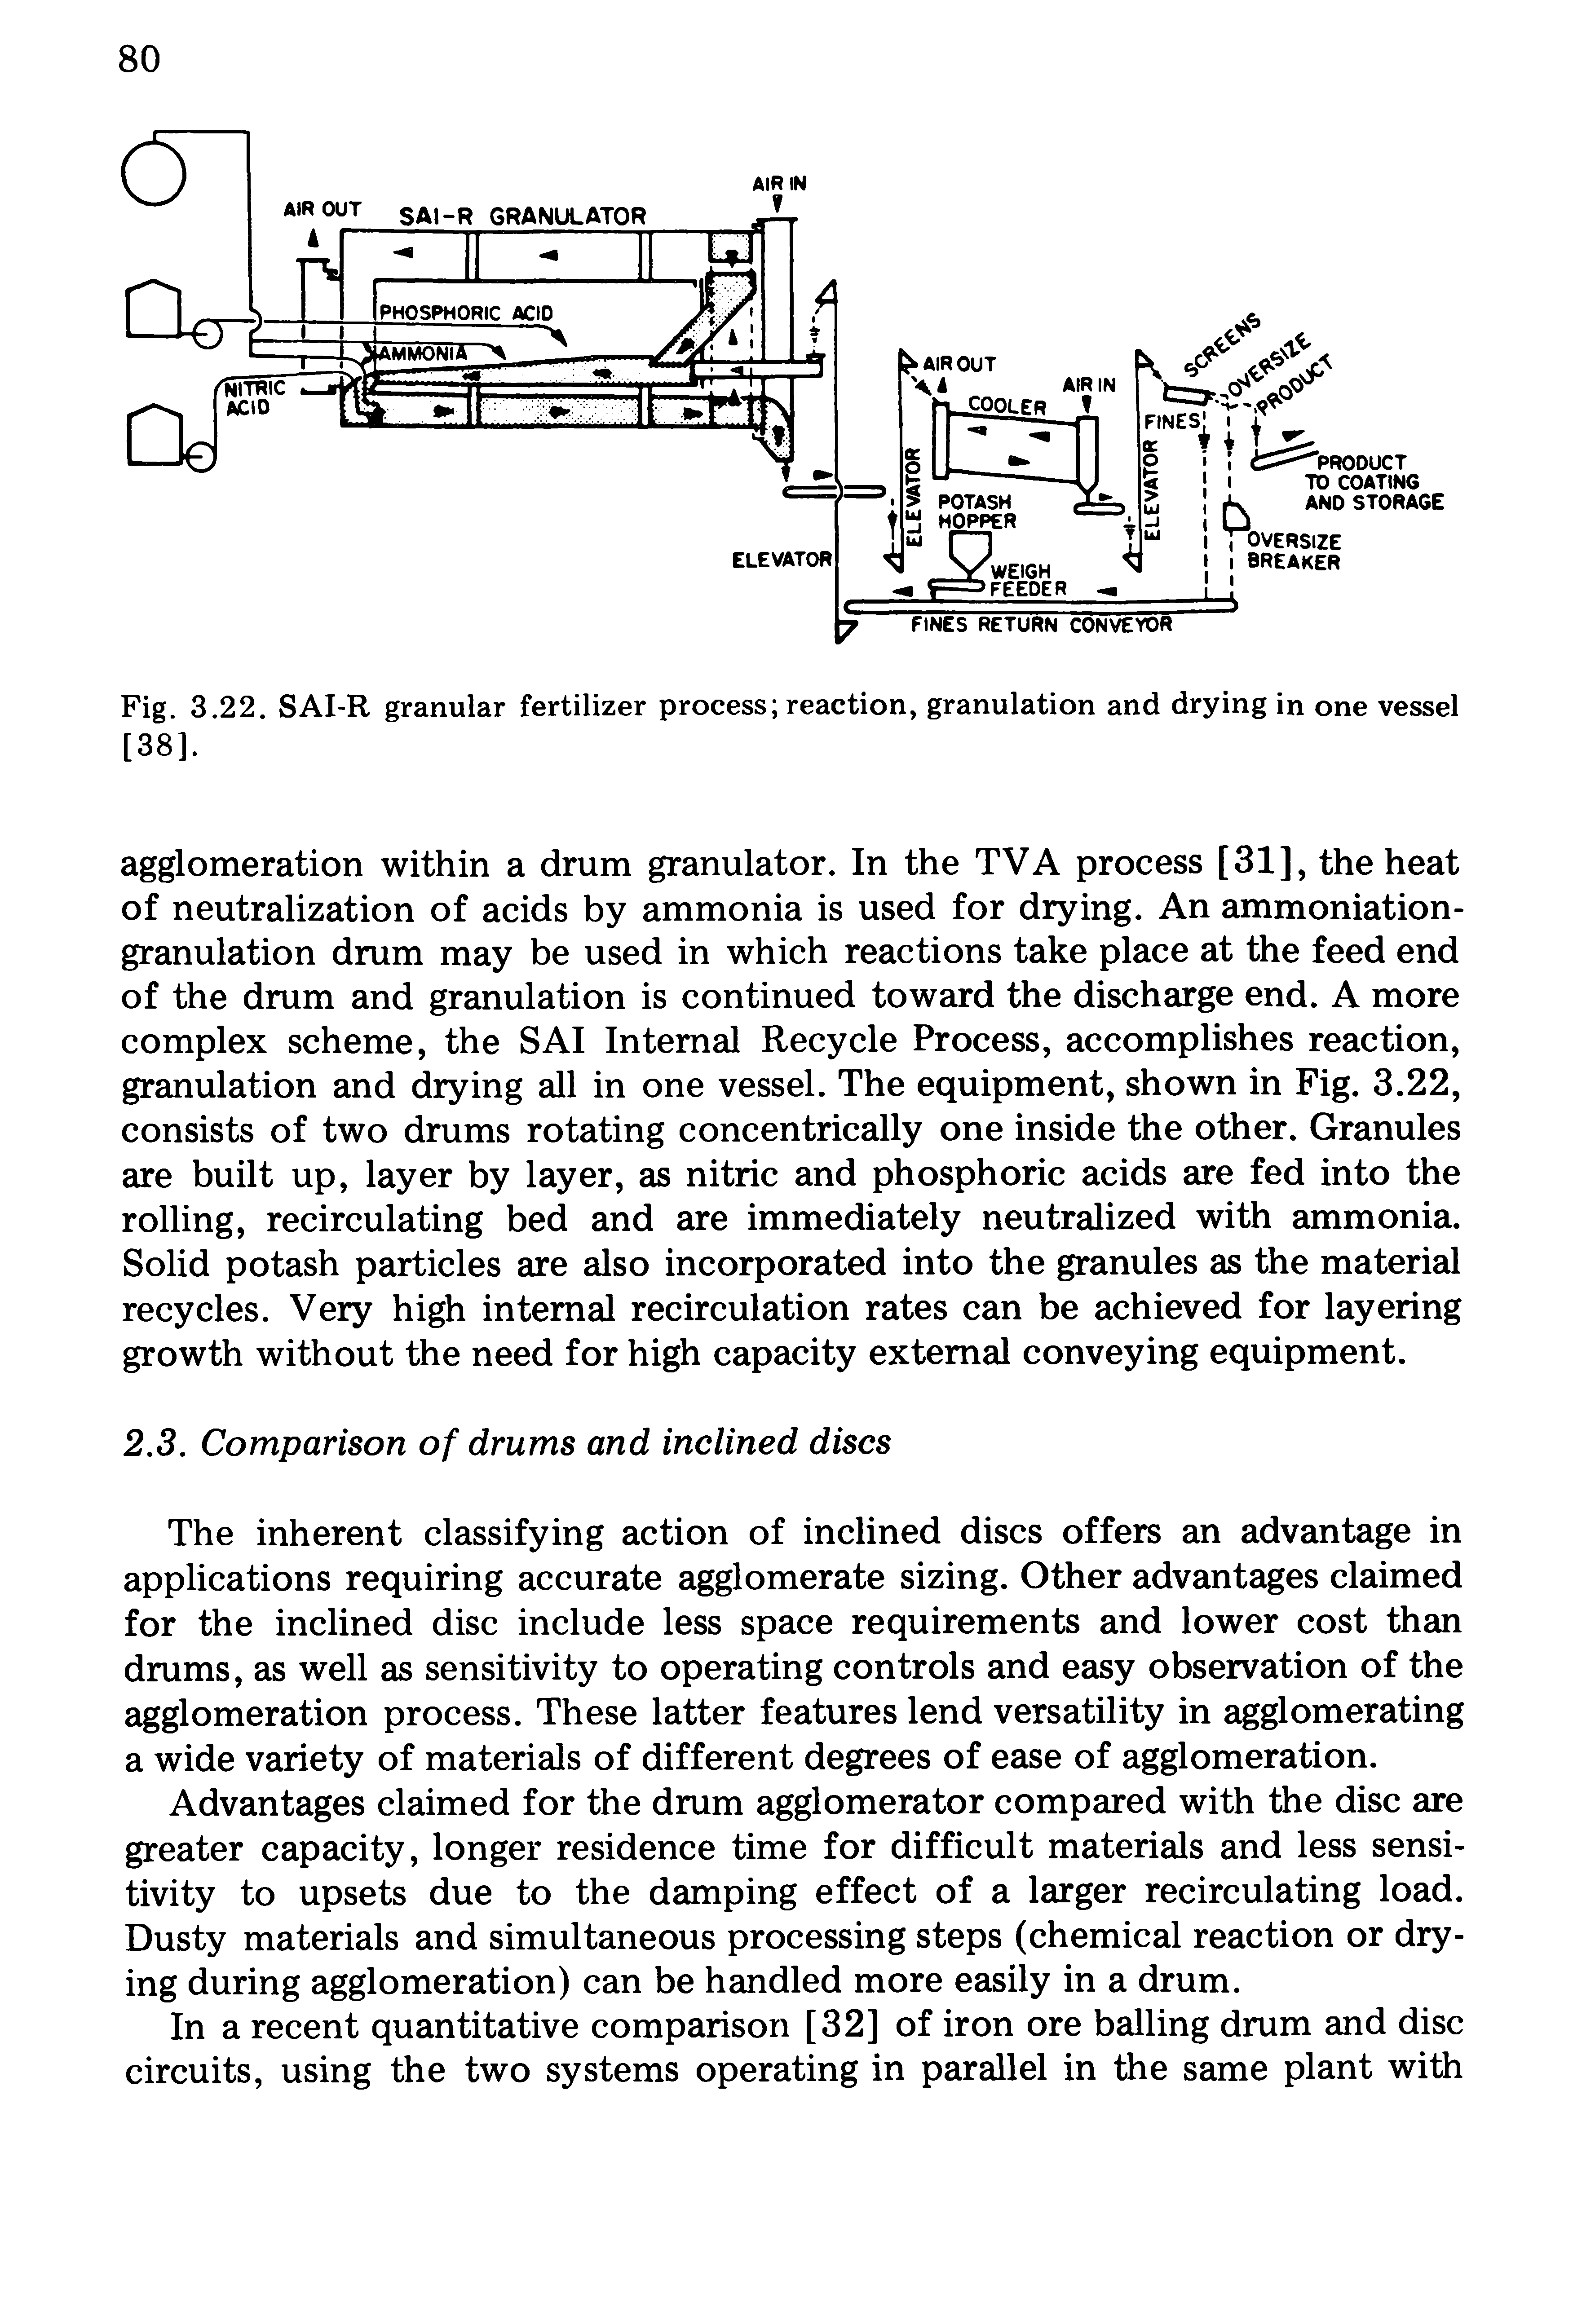 Fig. 3.22. SAI-R granular fertilizer process reaction, granulation and drying in one vessel [38].